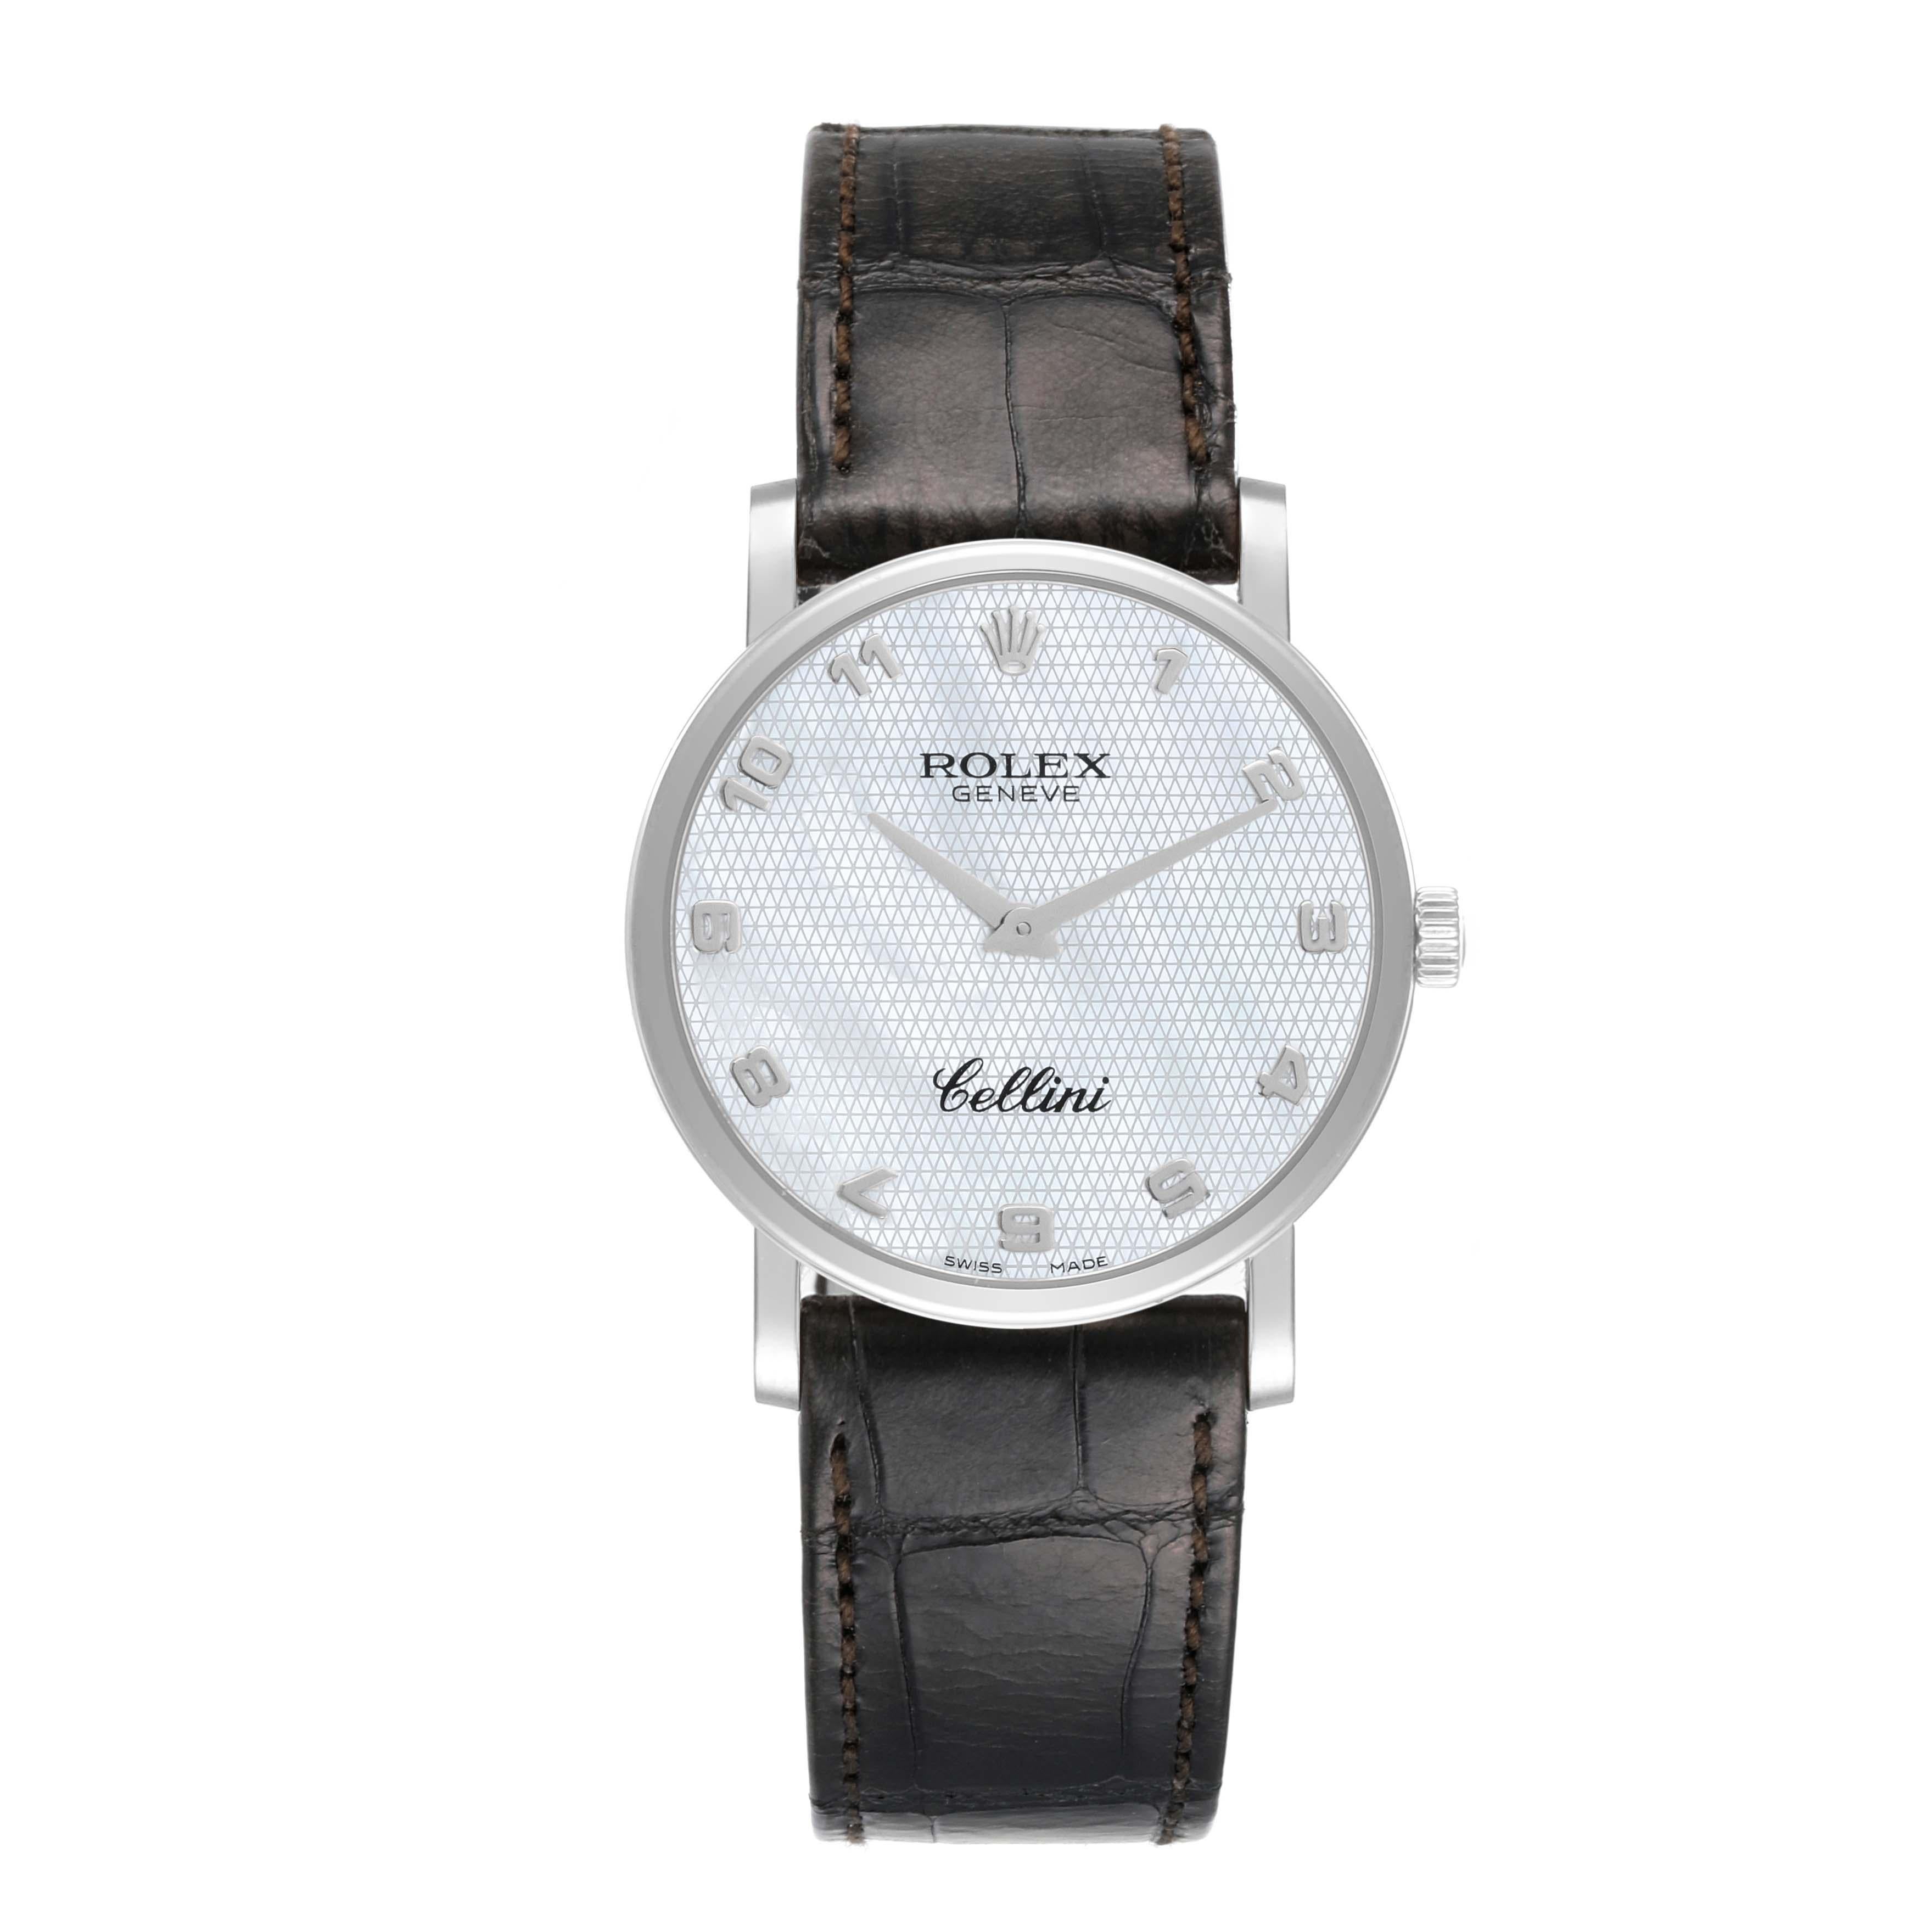 Rolex Cellini Classic White Gold Mother Of Pearl Dial Mens Watch 5115 Unworn. Manual winding movement. 18k white gold slim case 31.8 x 5.5 mm in diameter. Rolex logo on the crown. . Scratch resistant sapphire crystal. Flat profile. Textured mother